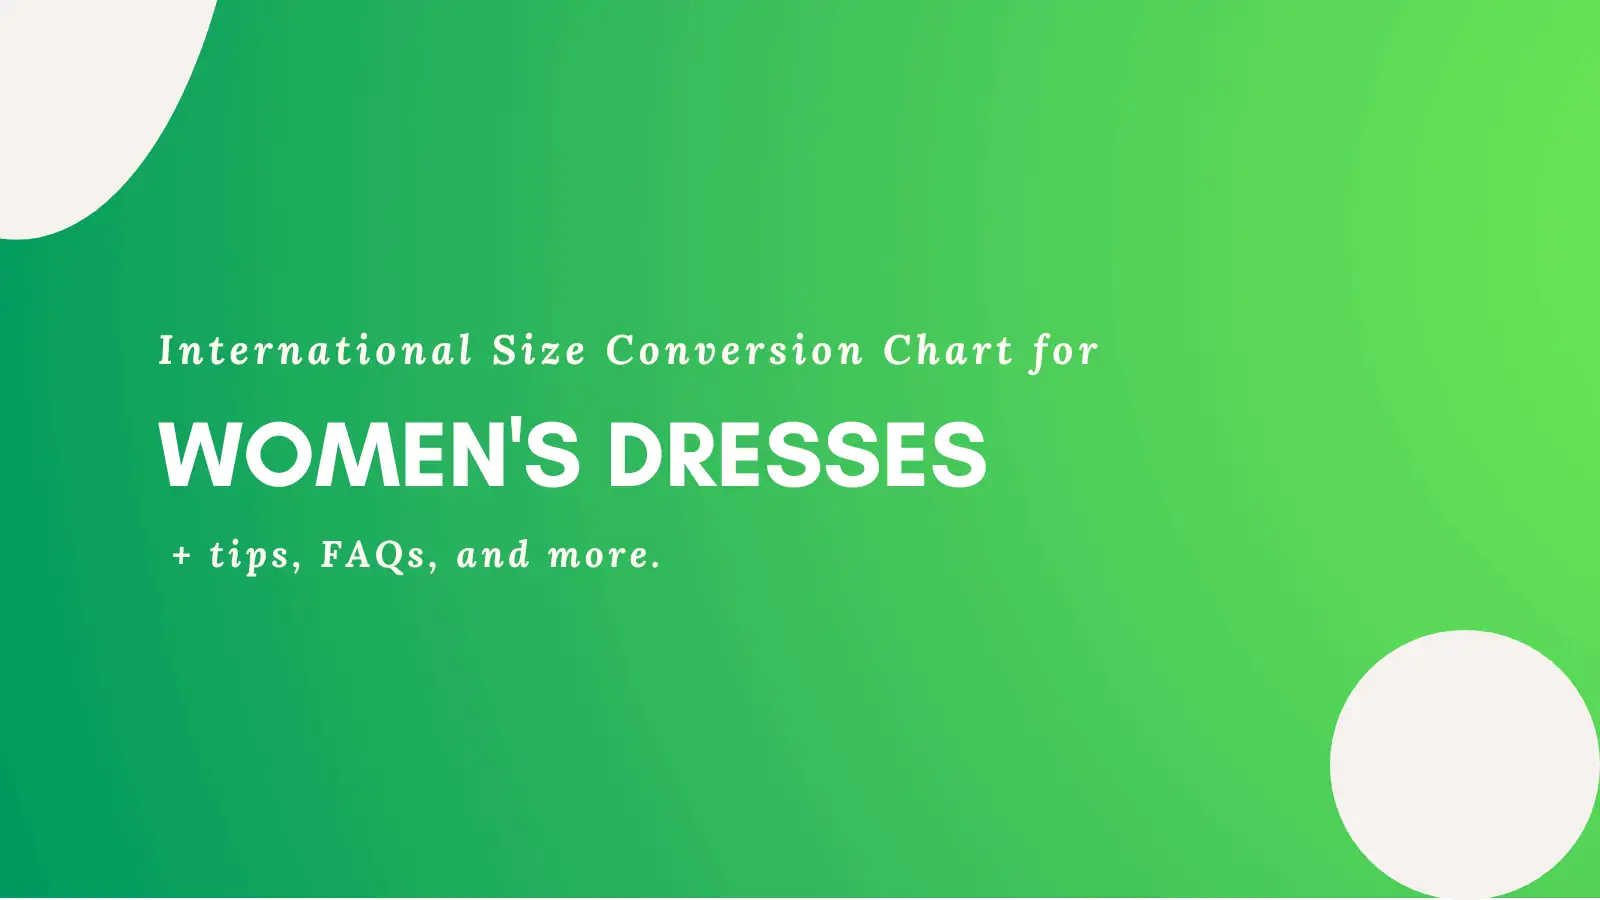 International Size Conversion Chart for Womens dresses